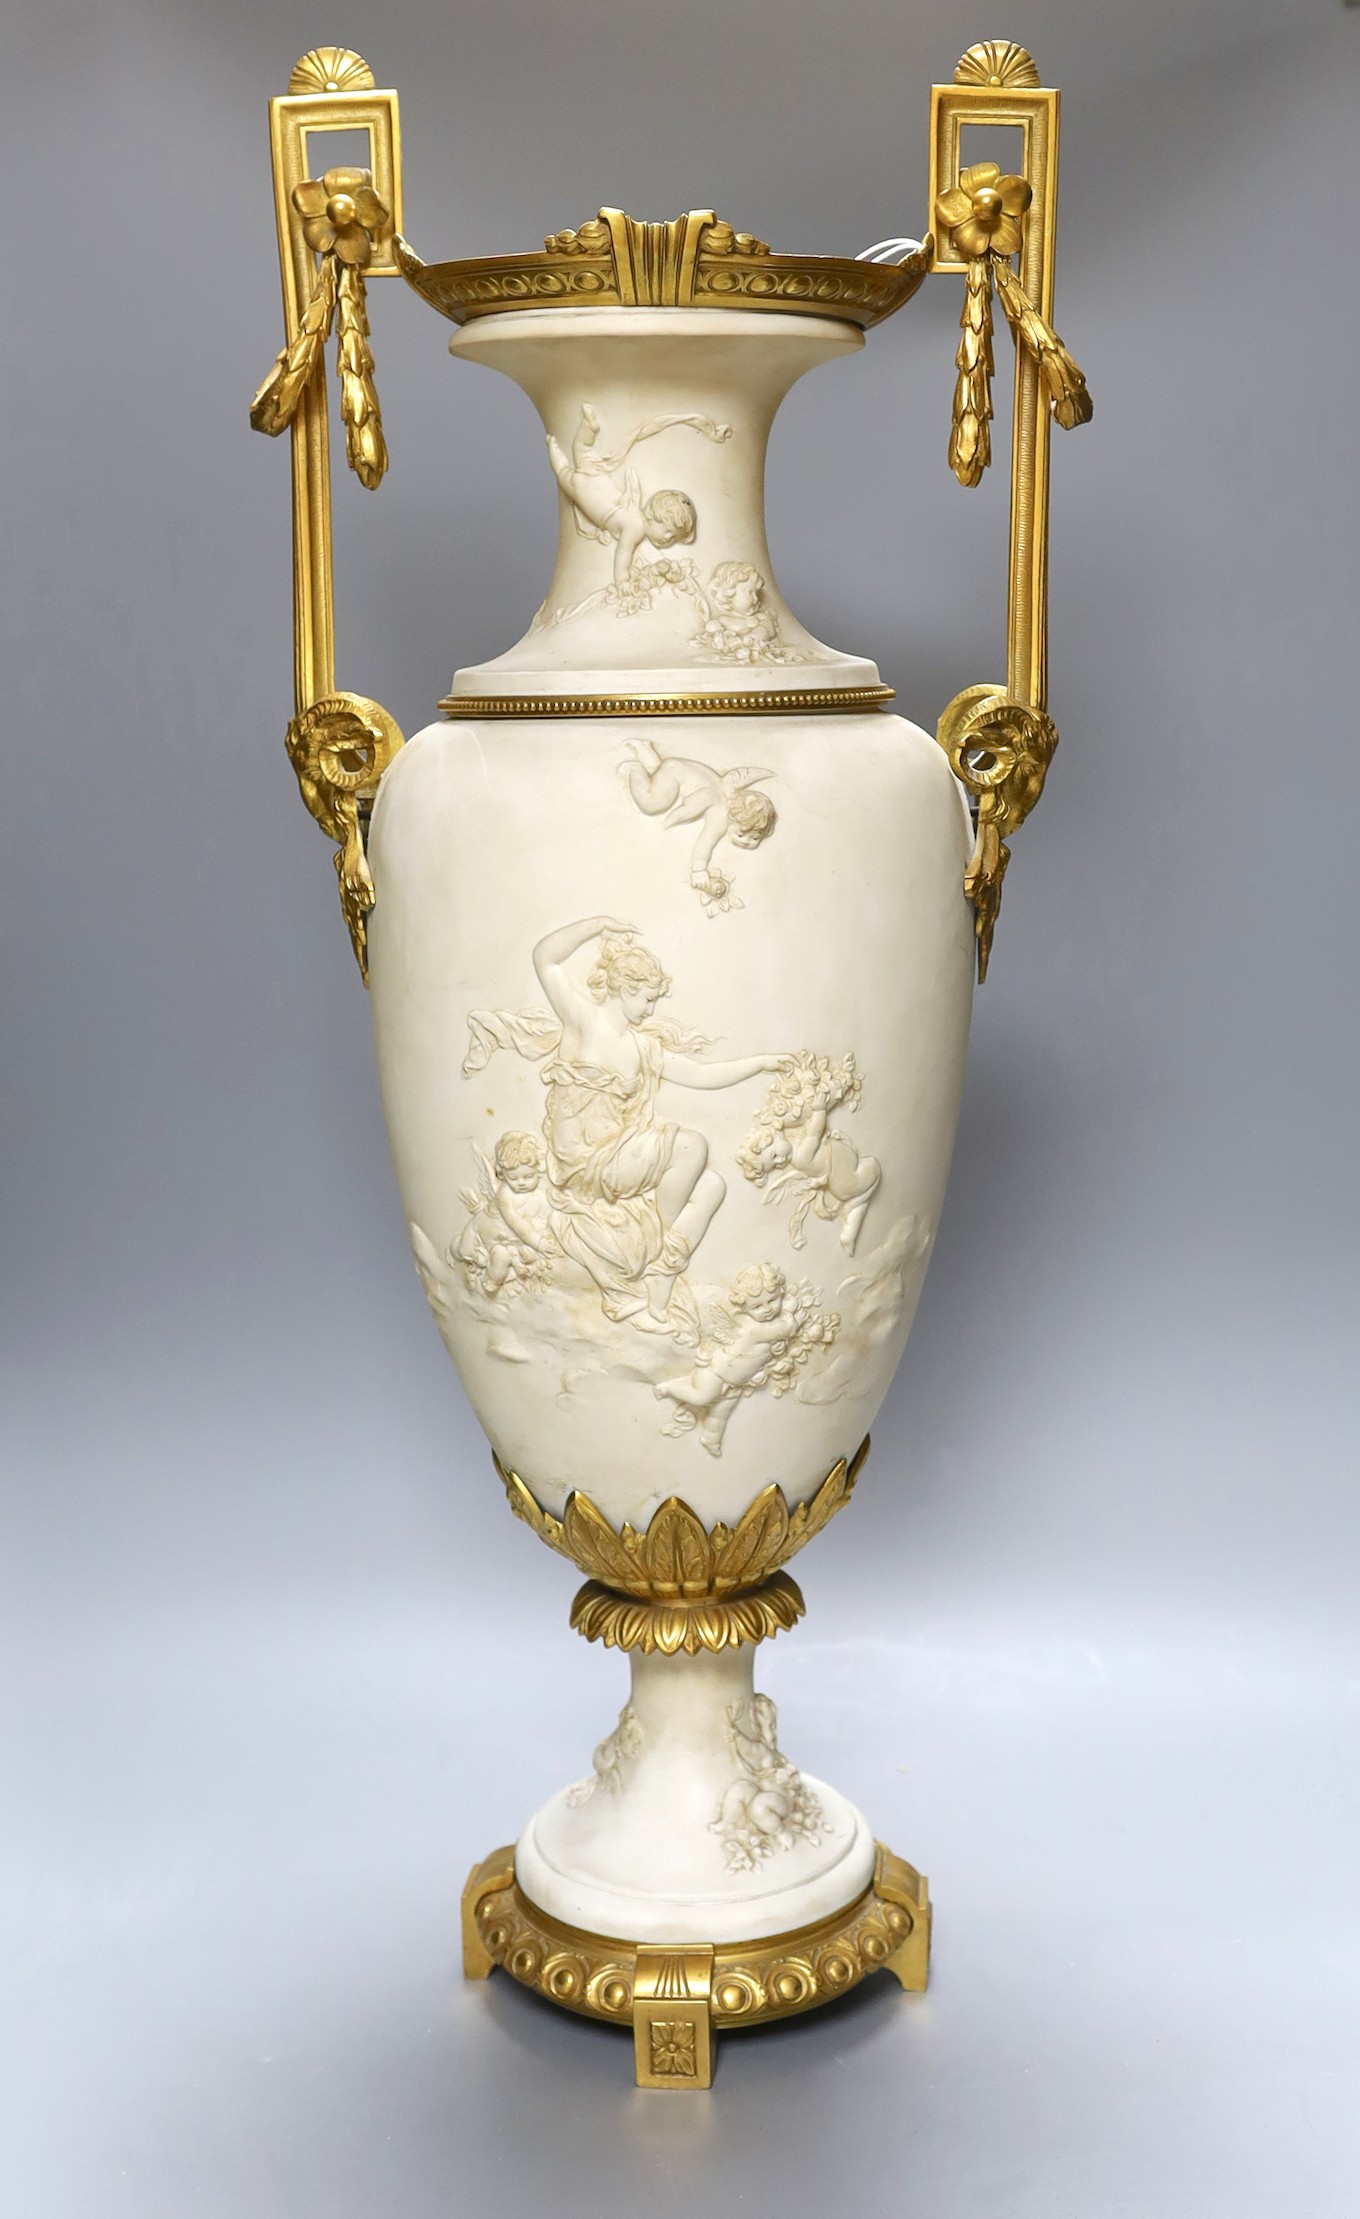 A large Louis XVI style ormolu mounted biscuit porcelain urn - 63cm tall